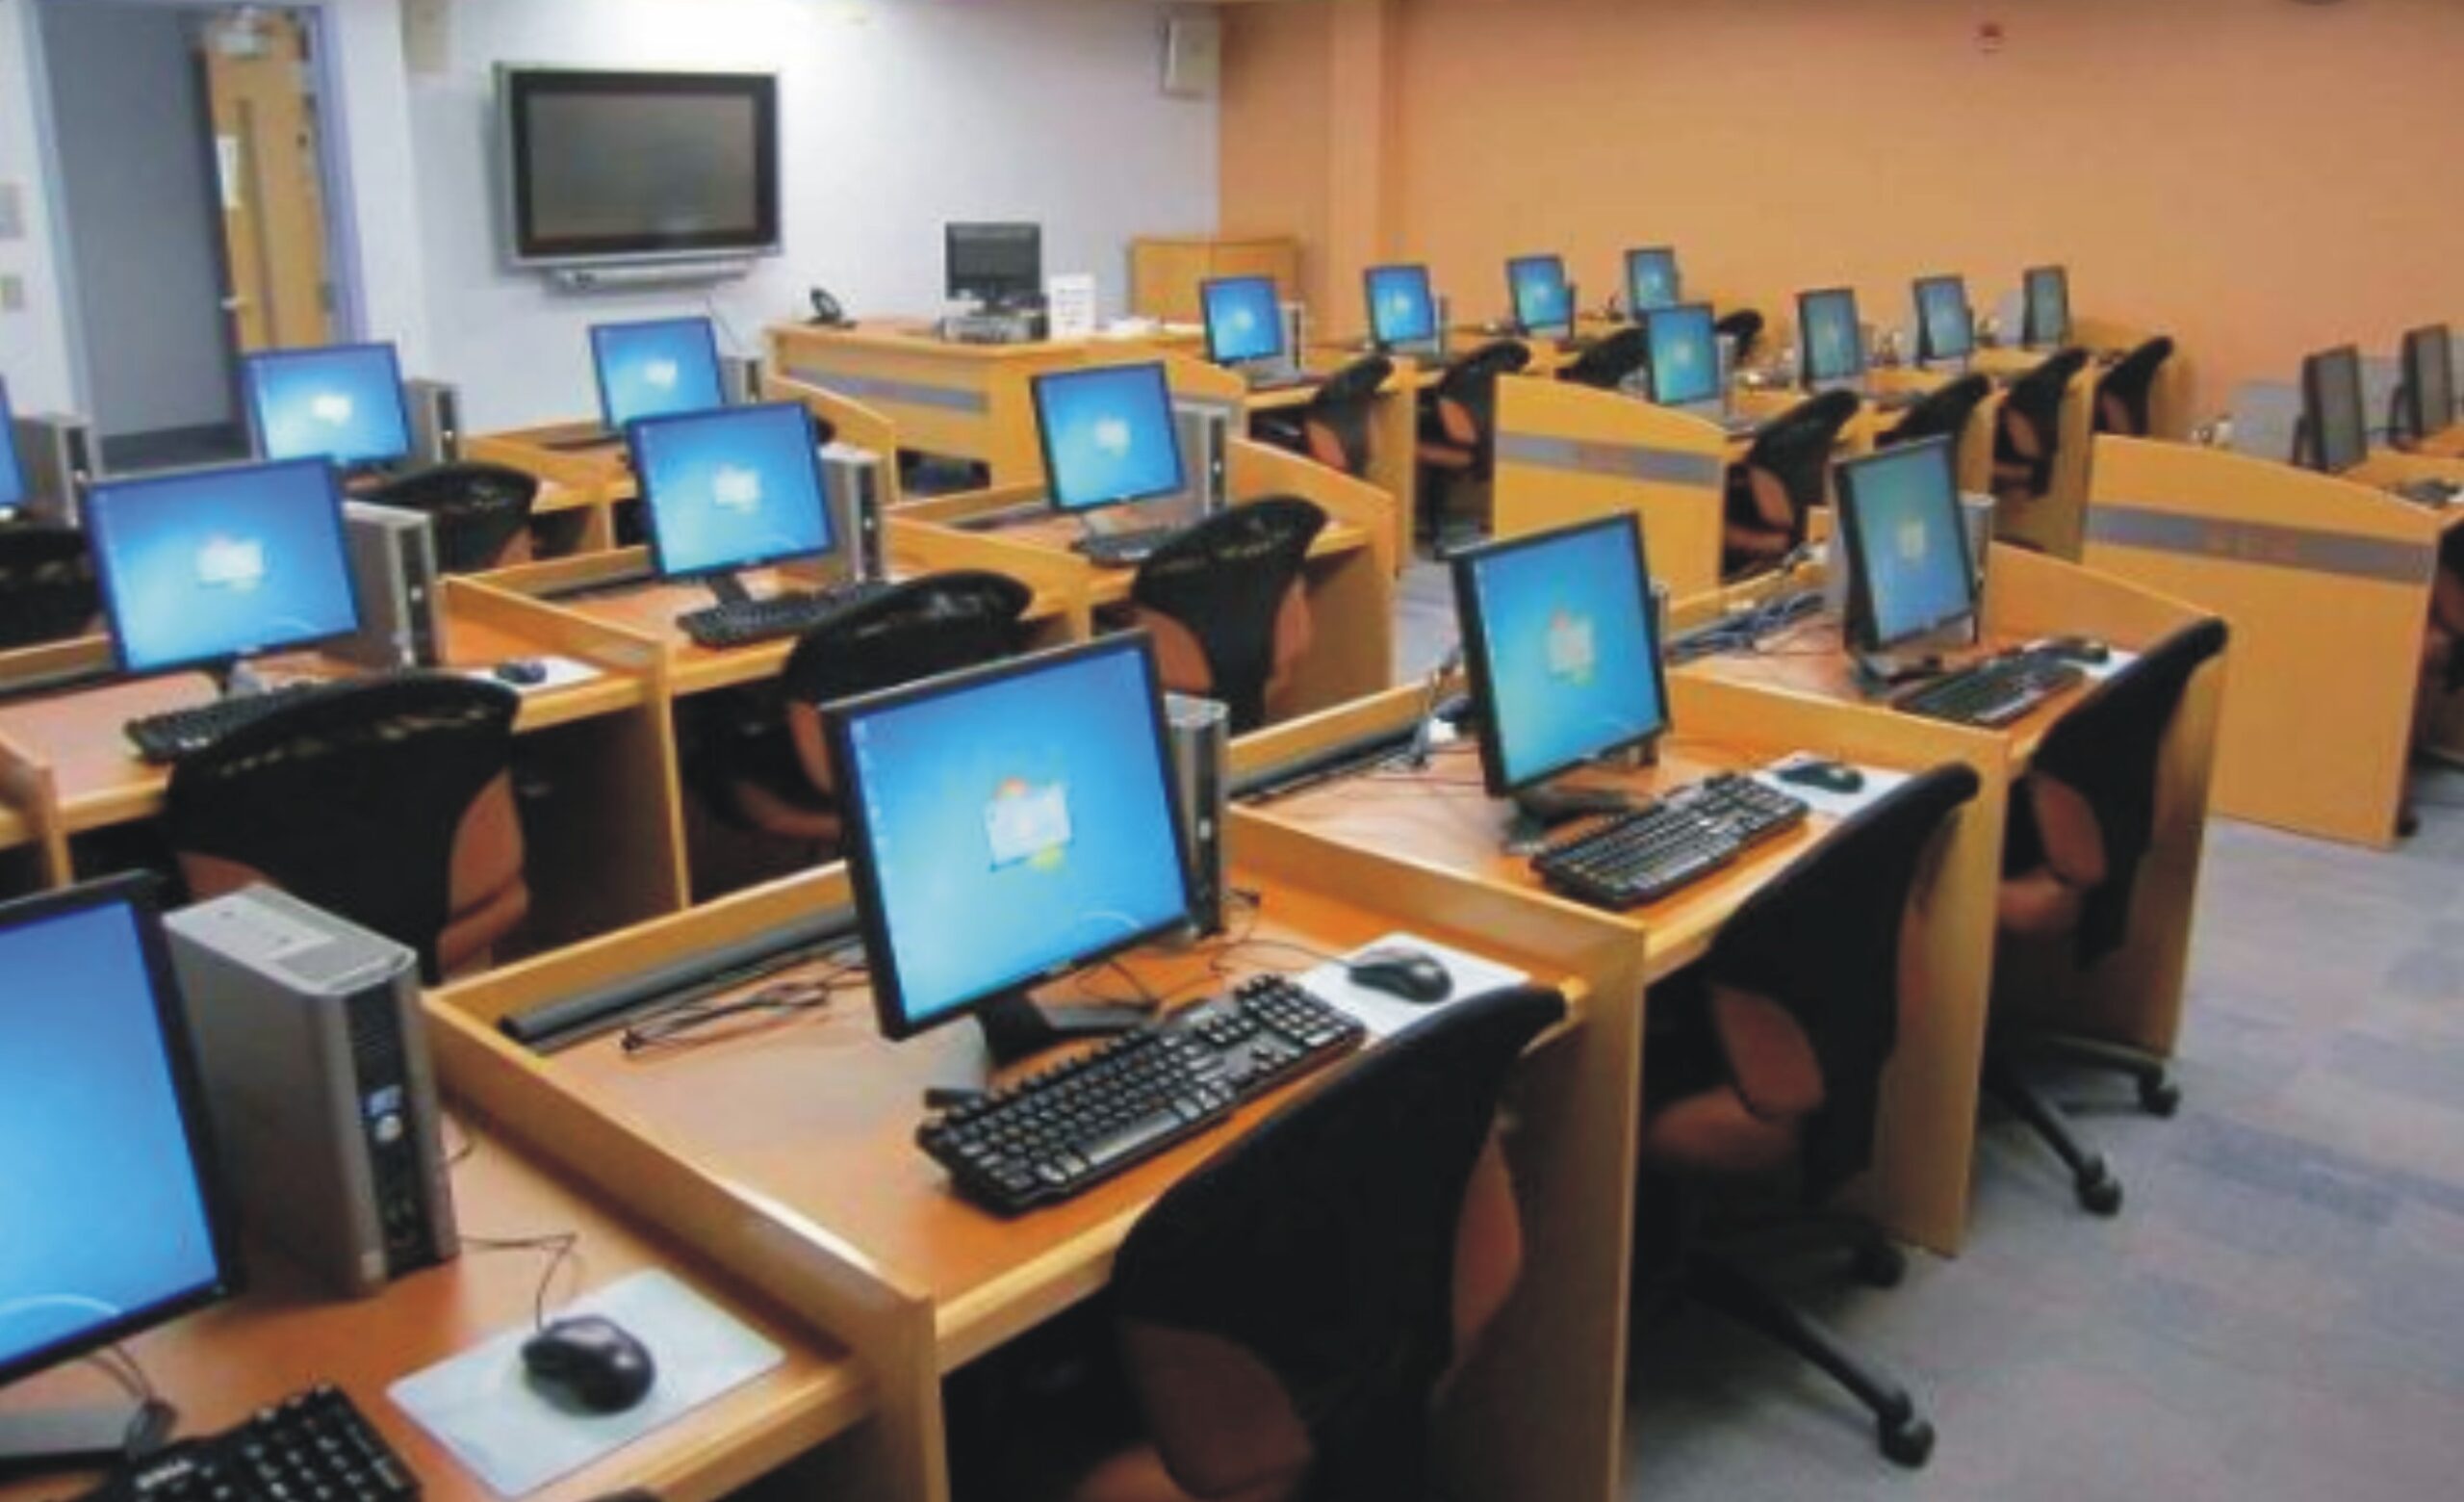 How to Start a Cyber Cafe Business In Nigeria